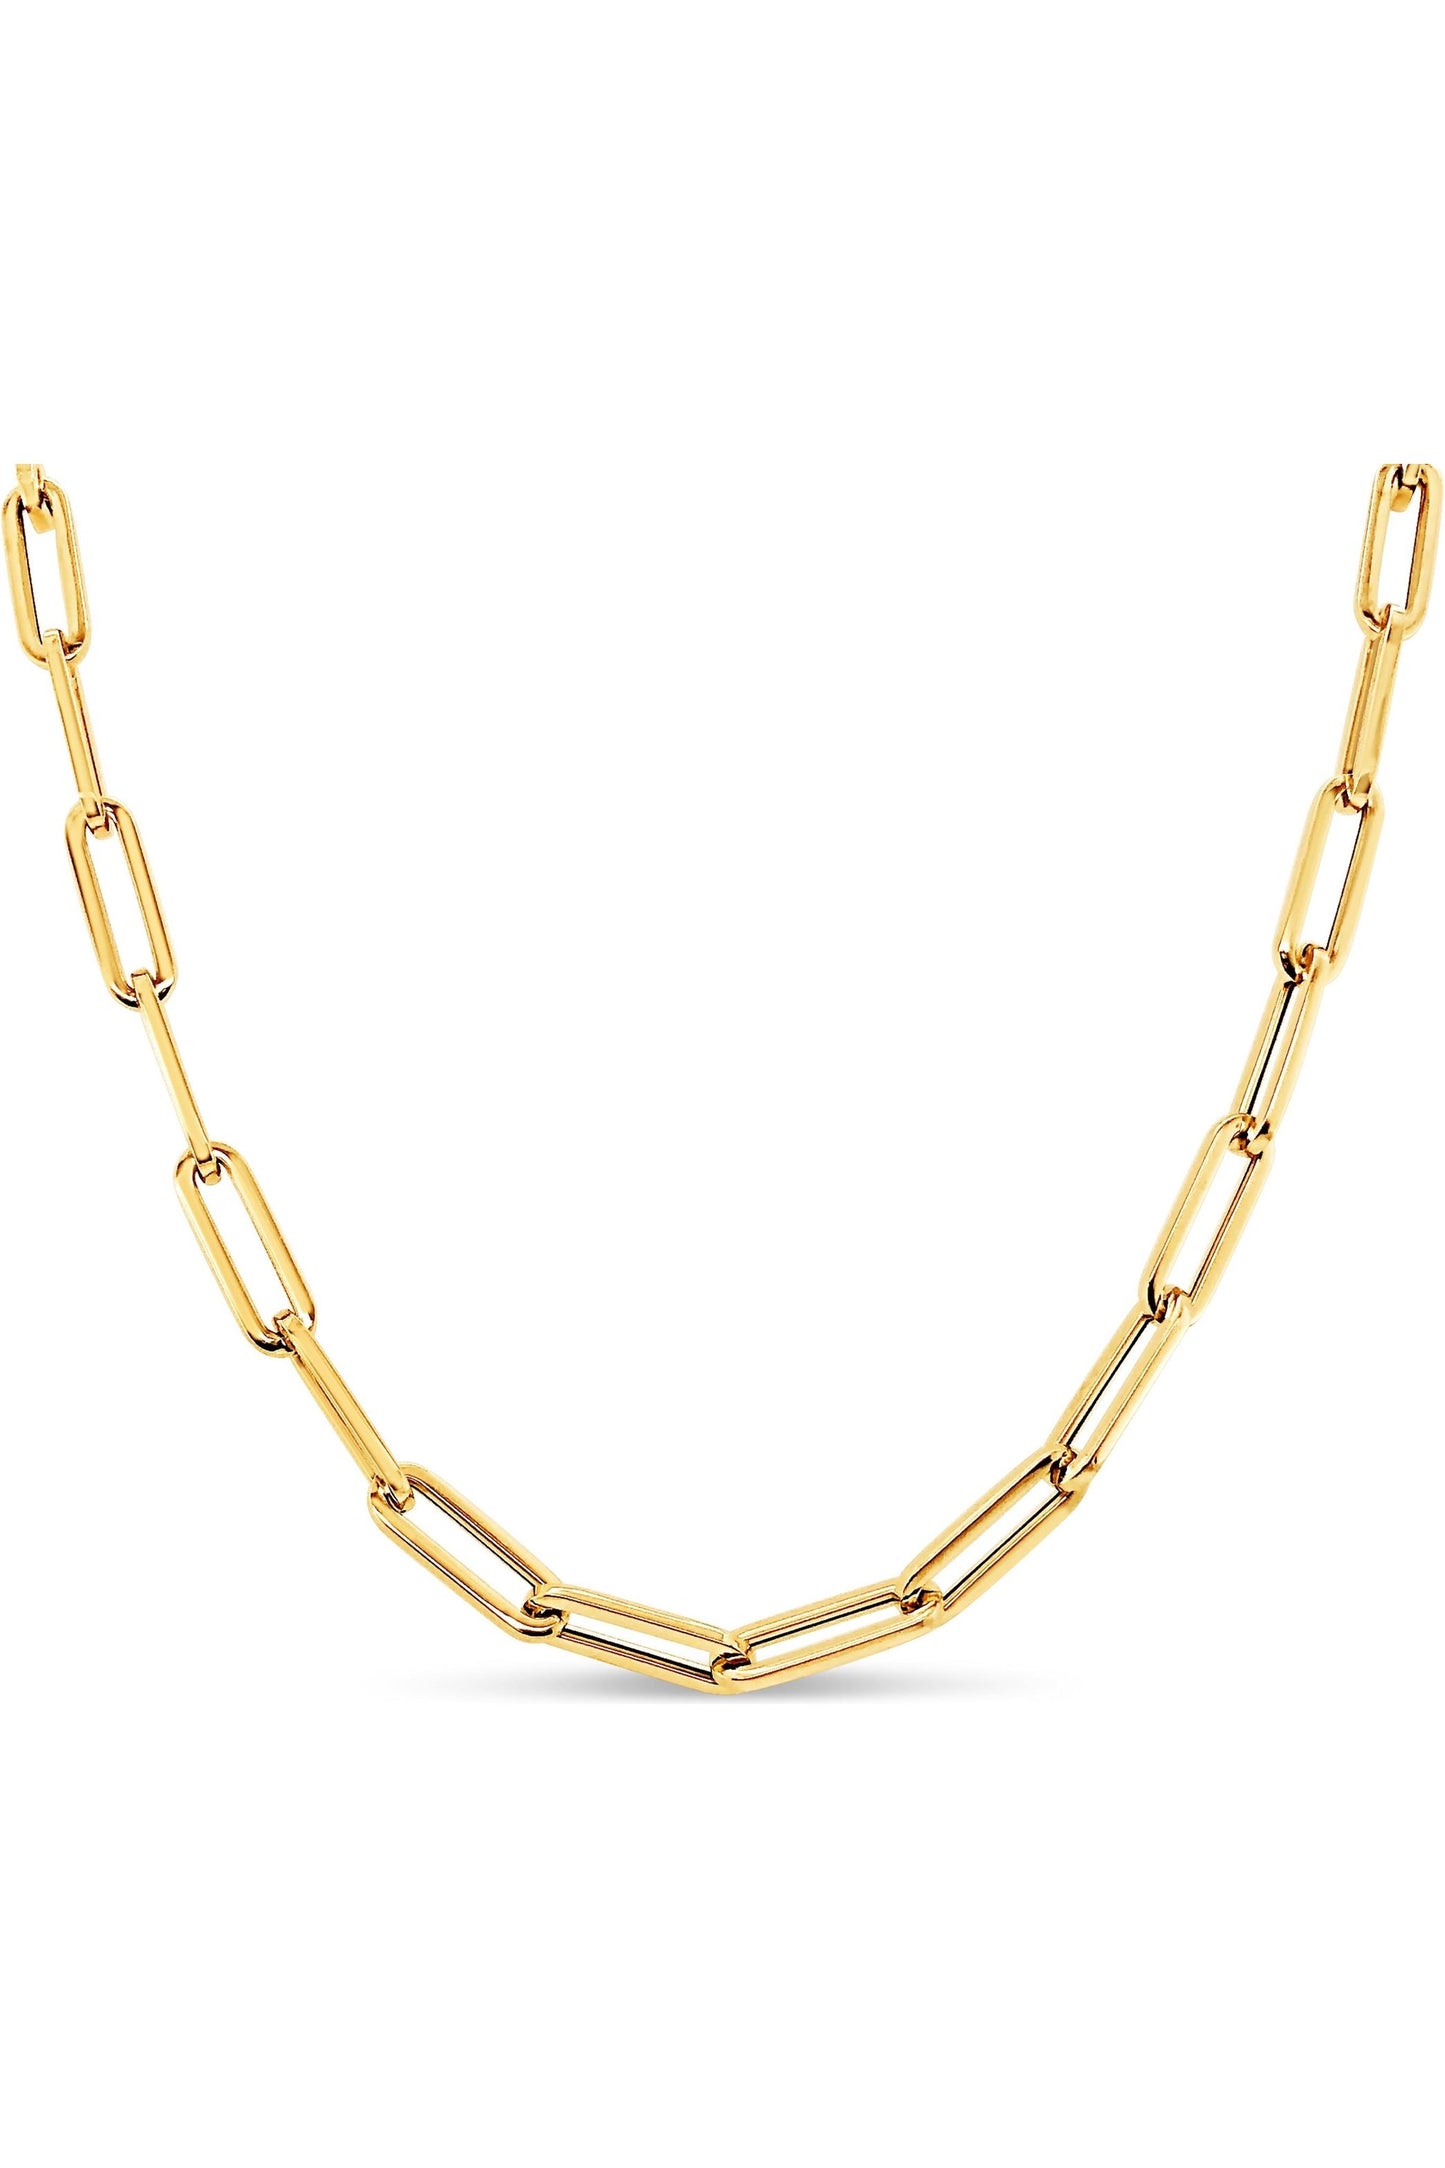 Gilded gold paperclip necklace